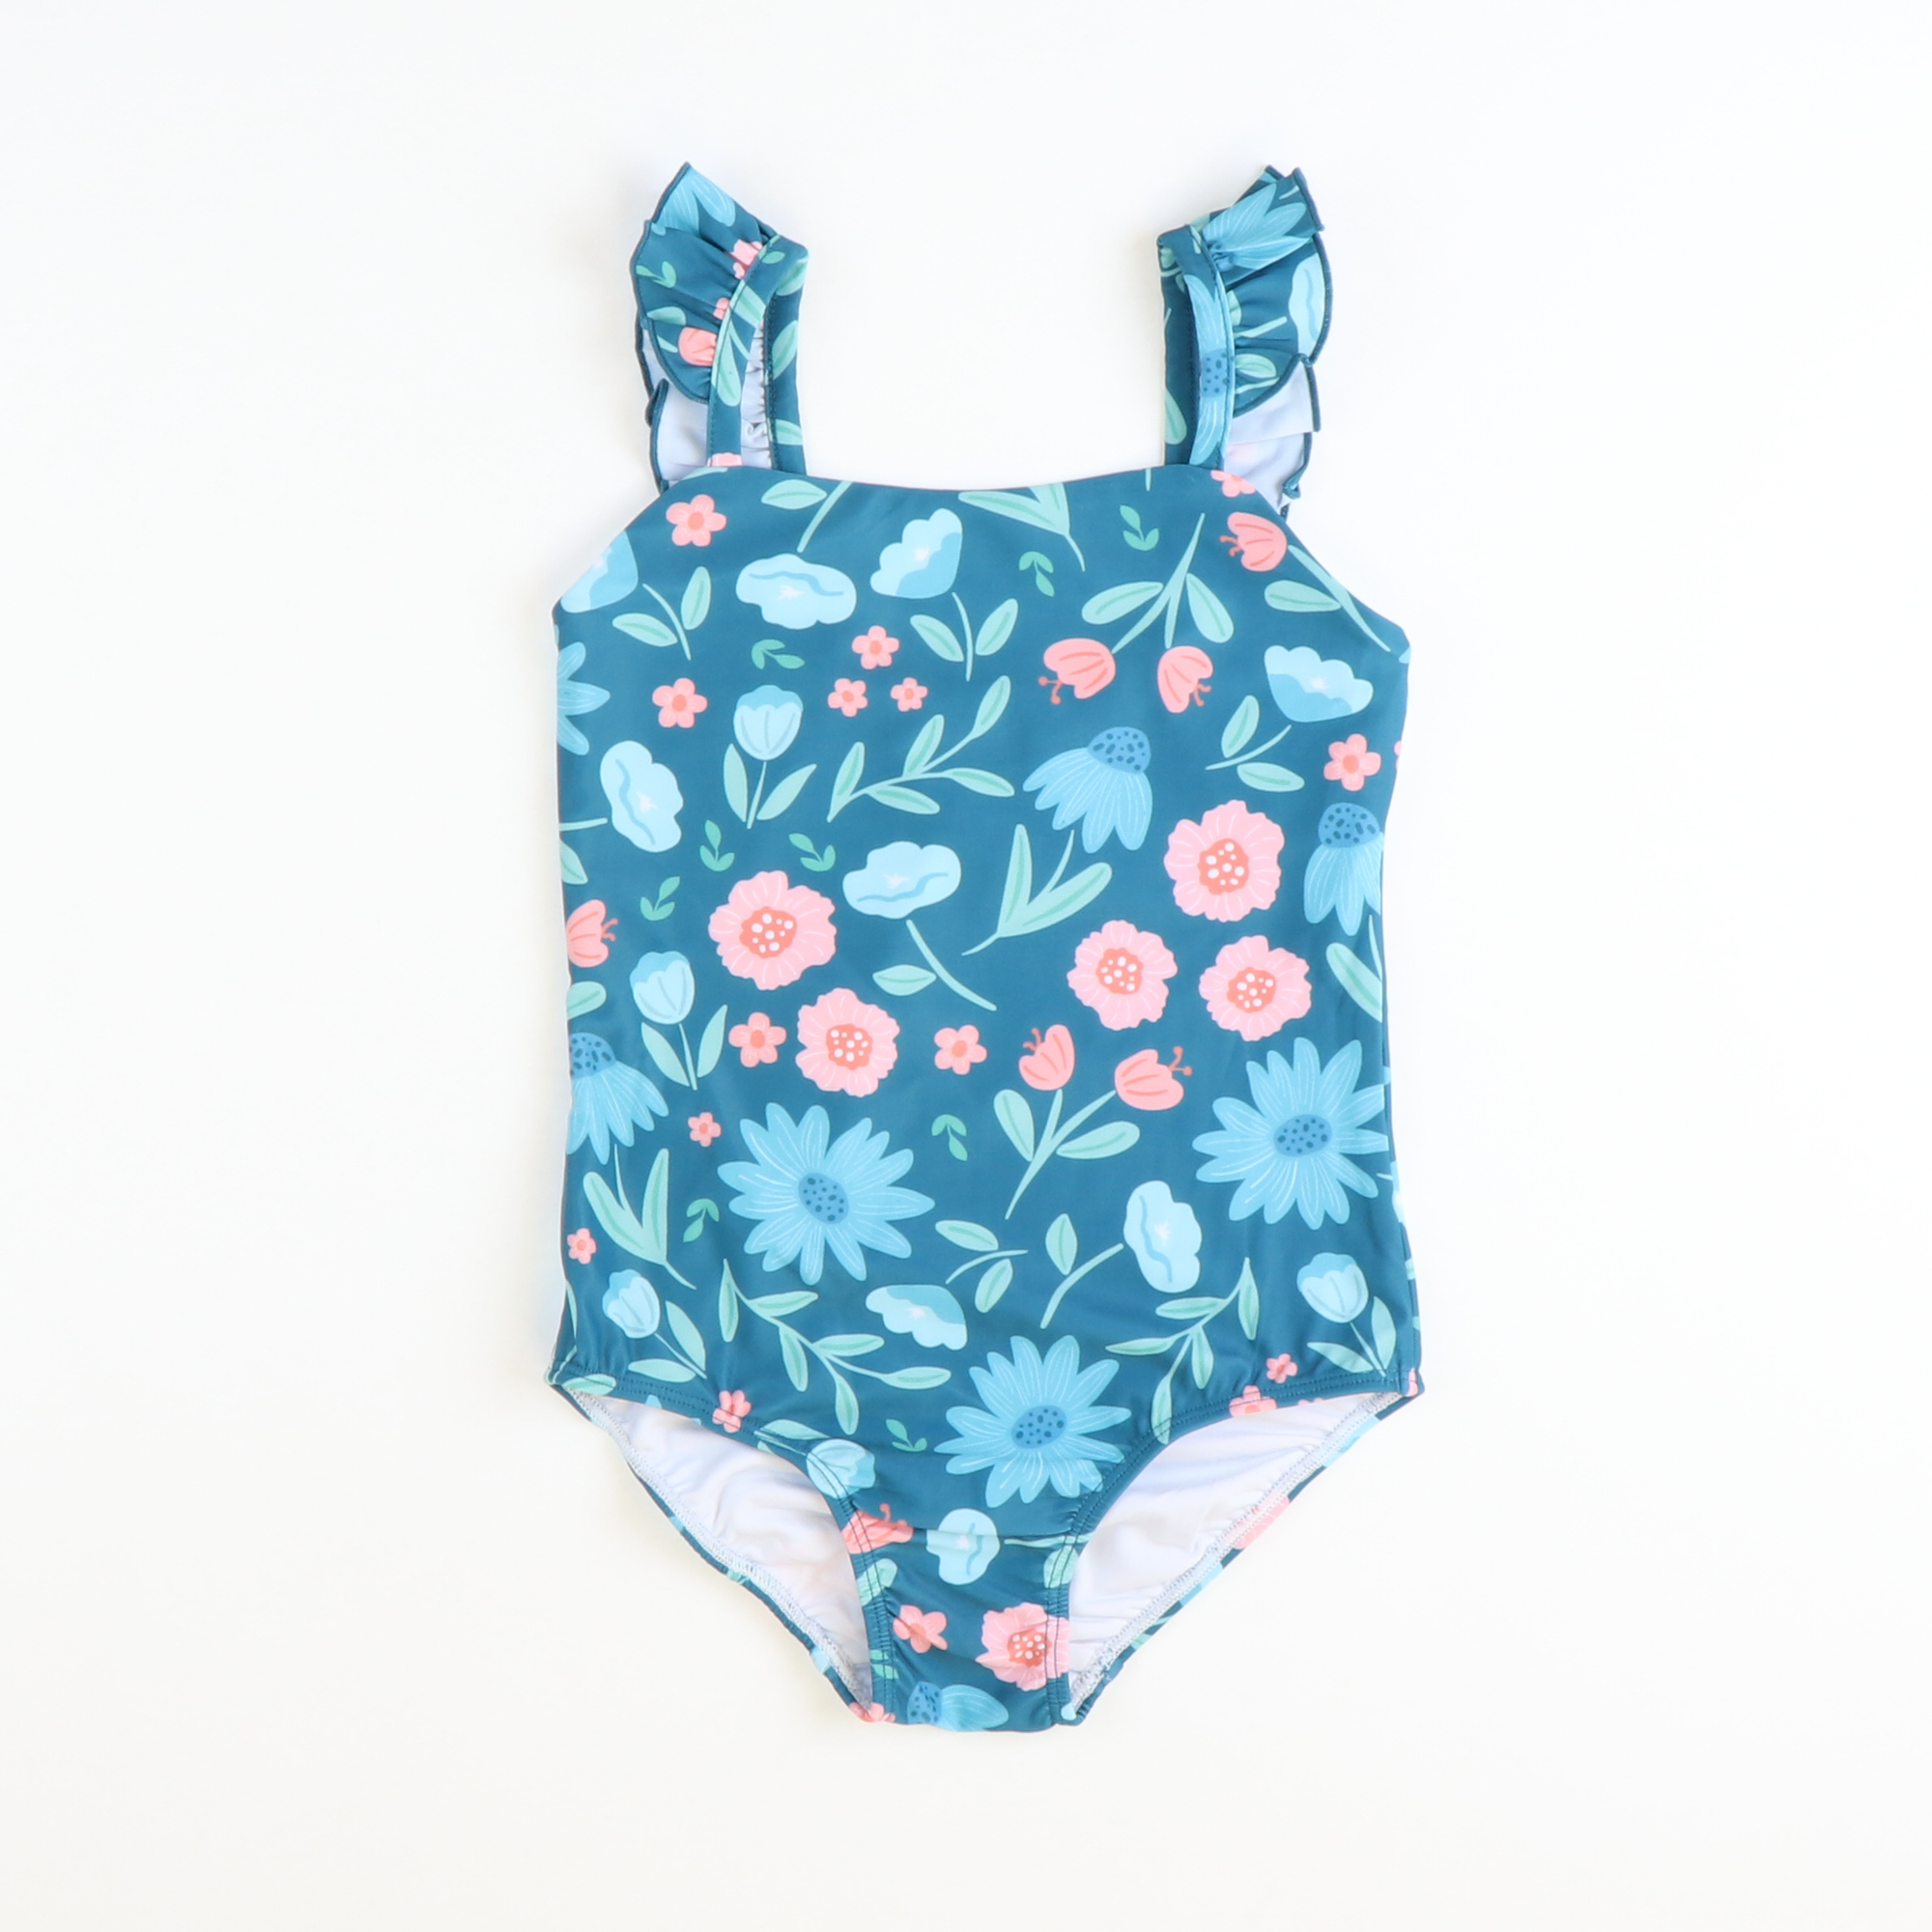 One-Piece Swimsuit - Bloom Print - Stellybelly